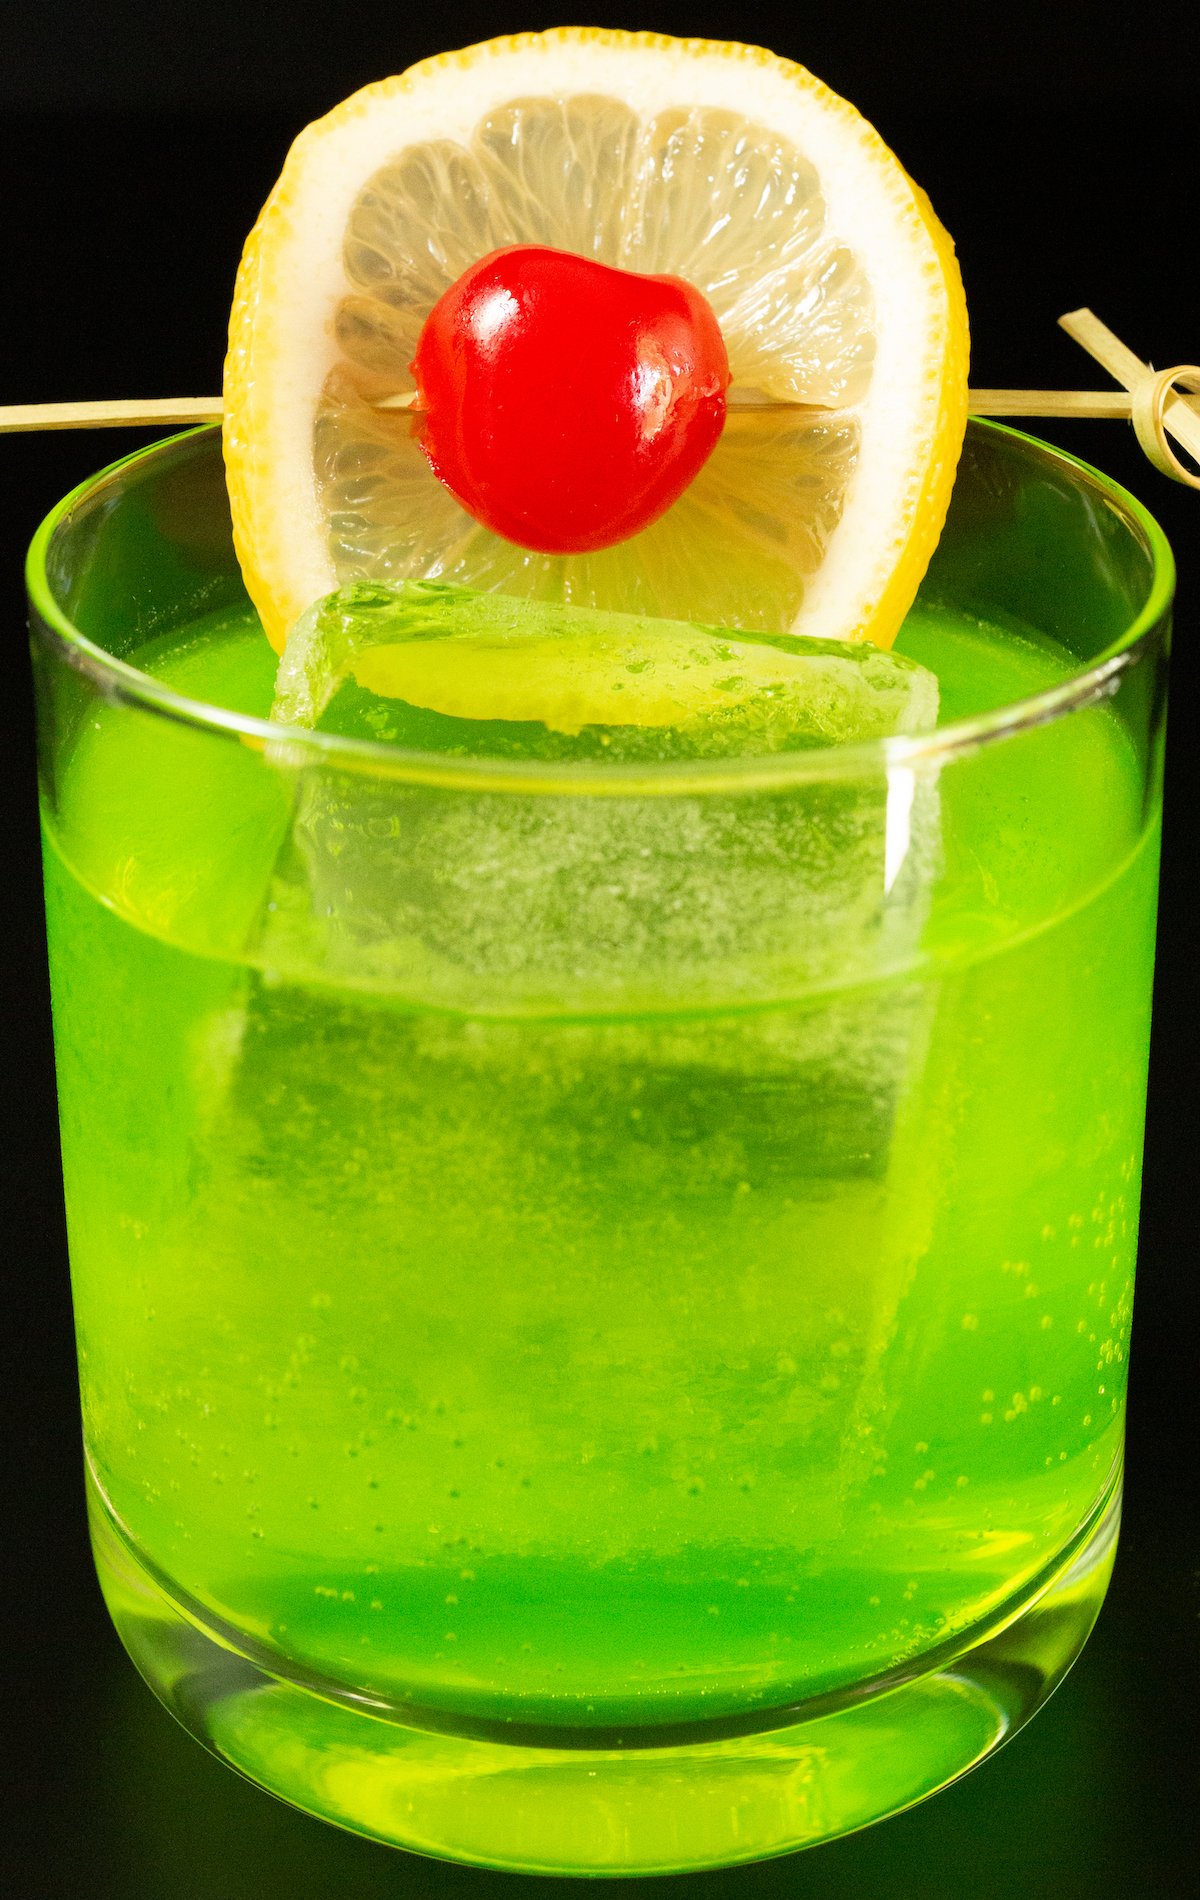 A lowball glass with a large block of ice is filled with a bright neon green Midori Sour cocktail that's garnished with a lime wheel and a maraschino cherry on a skewer.